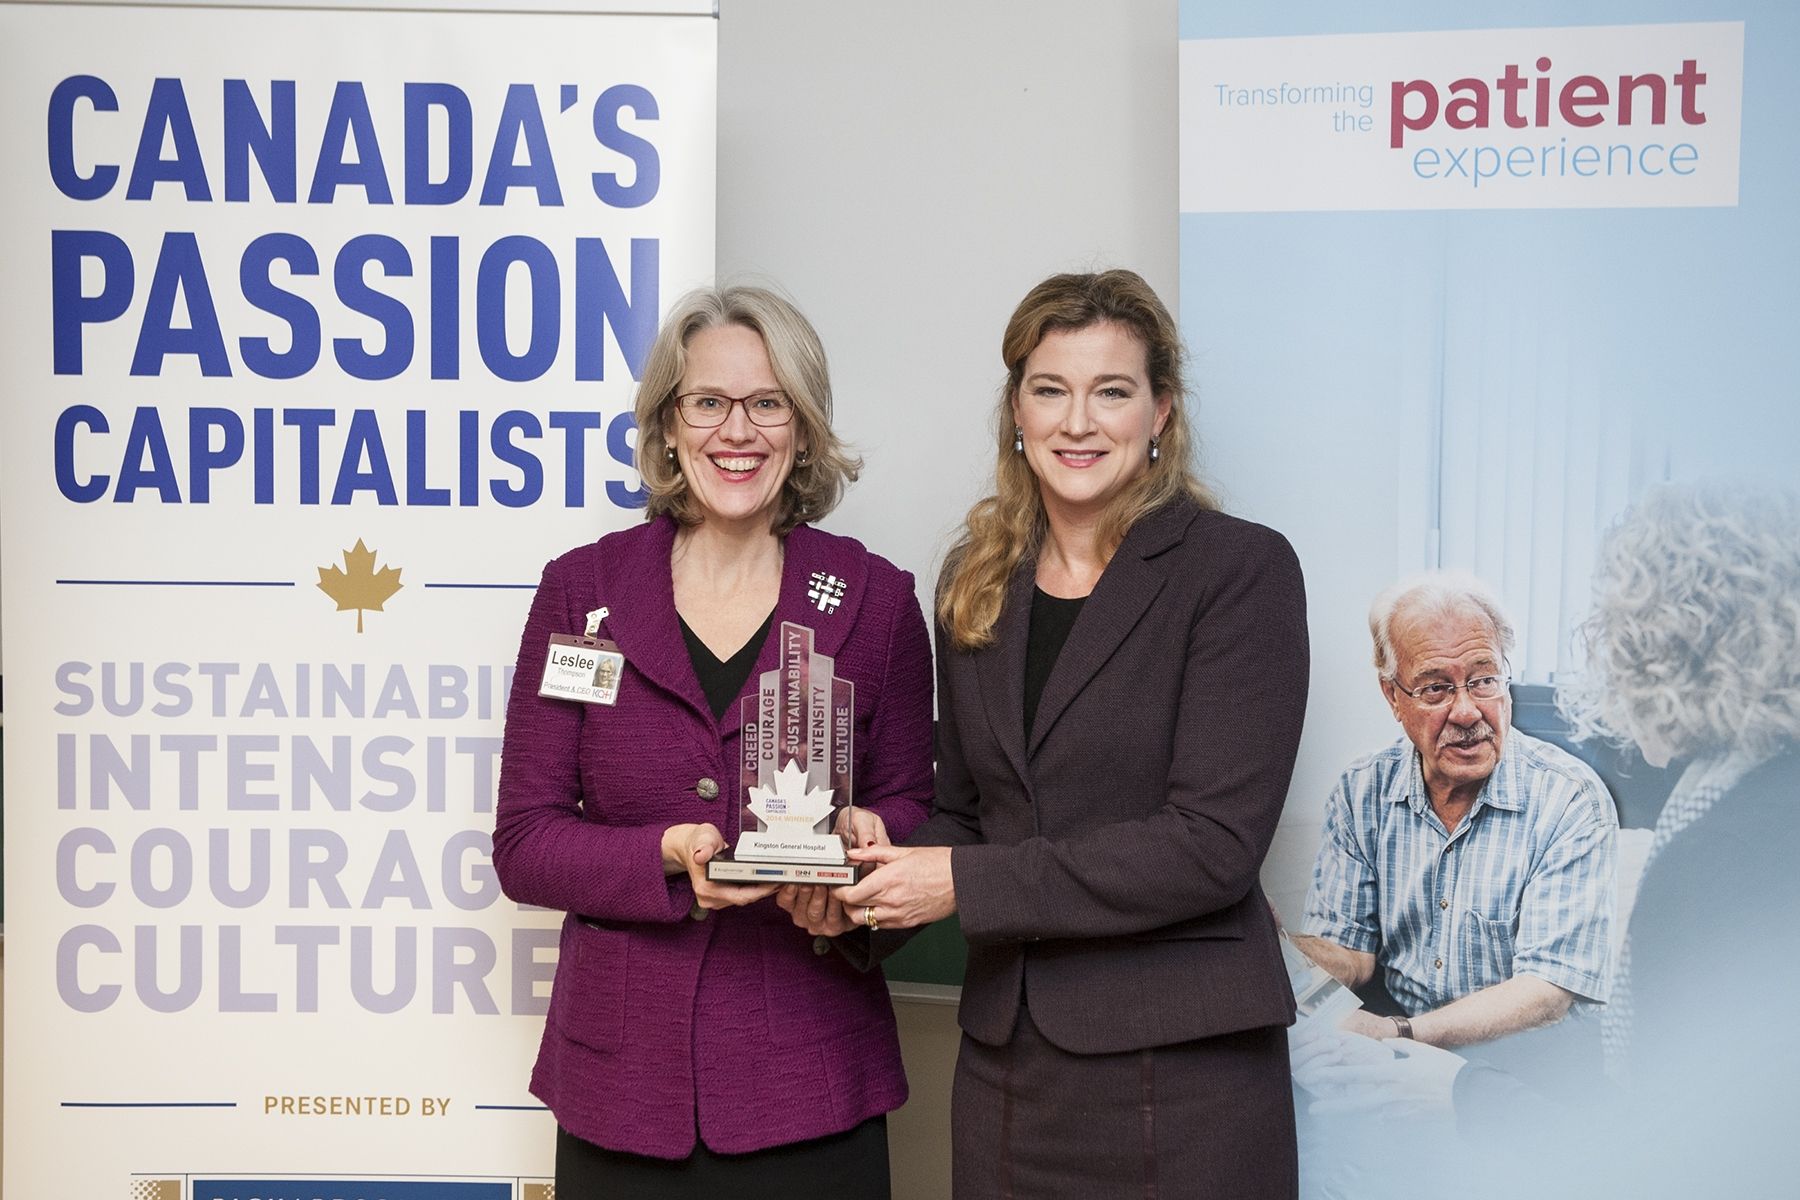 KGH President & CEO Leslee Thompson receives KGH's Passion Capital Award from Leslie Carter, Chief Brand & Strategy Officer at Knightsbridge Human Capital Solutions on December 1, 2014.